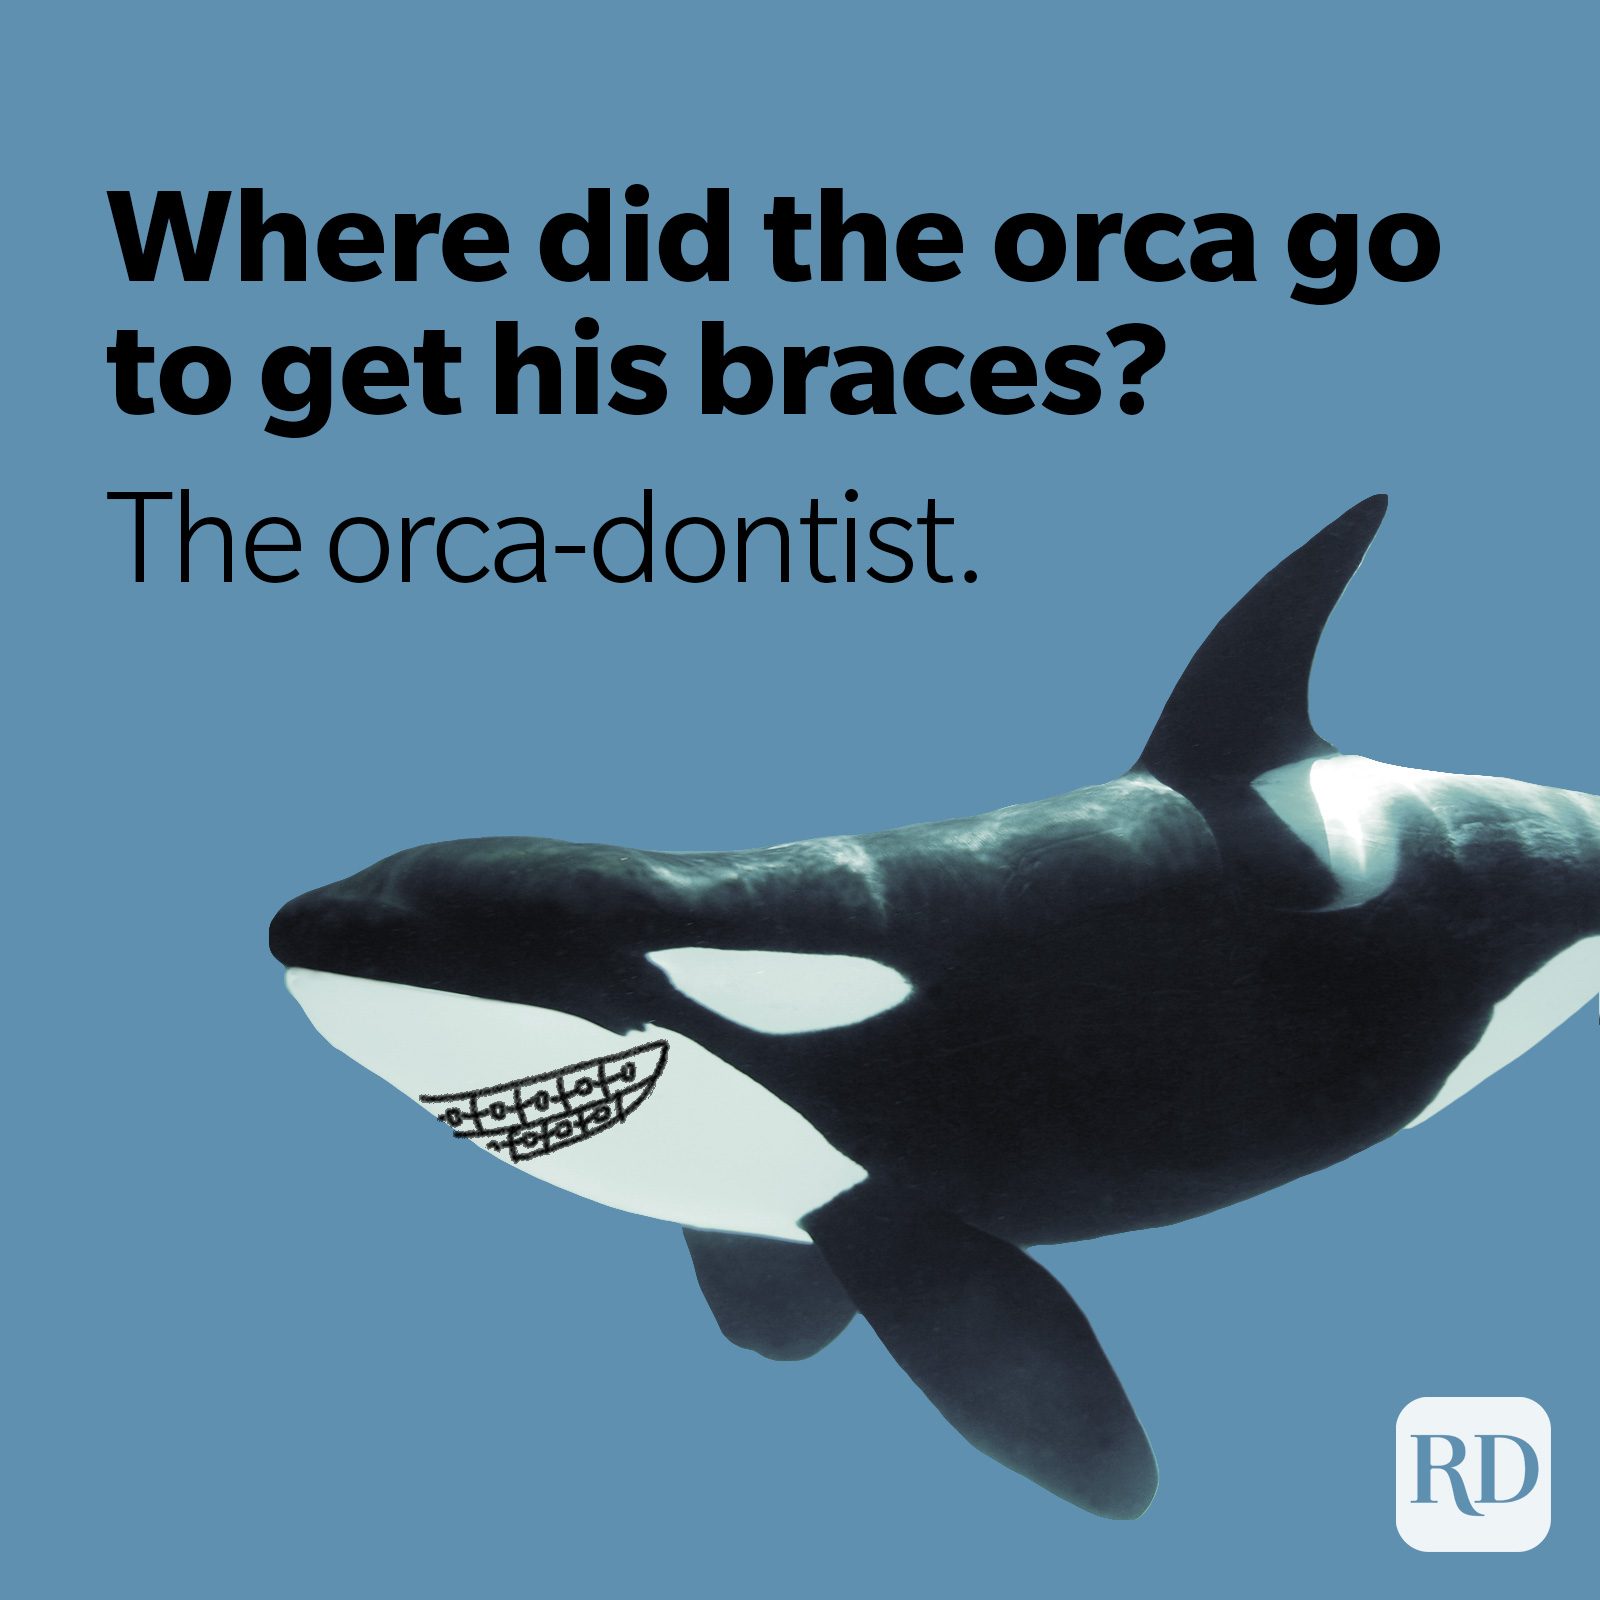 Orca whale with braces after visiting orca-dentist